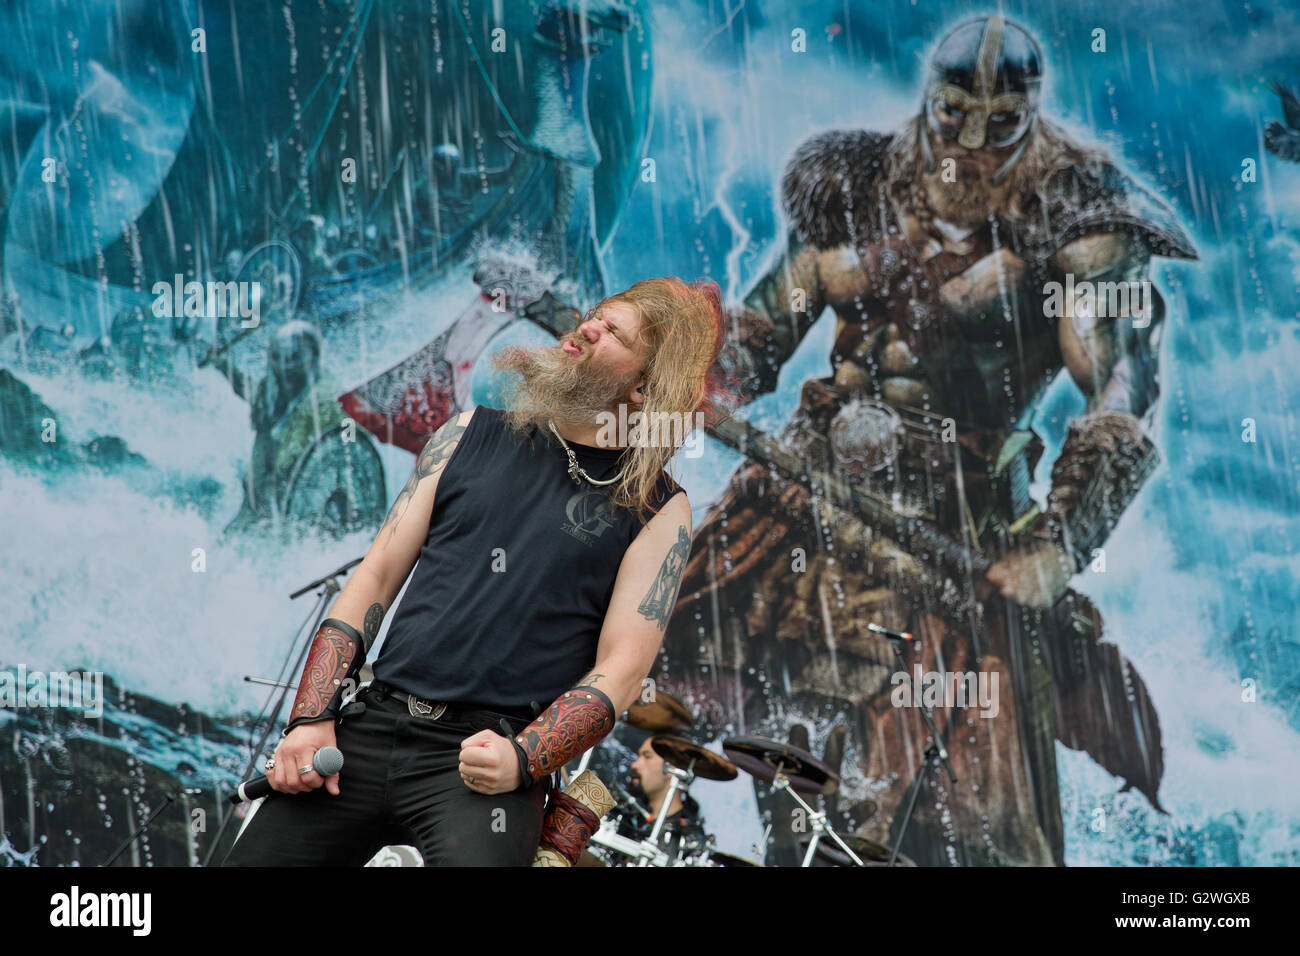 Nuremberg, Germany. 04th June, 2016. Johan Hegg, singer of Swedish death metal band Amon Amarth, performs at the Rock im Park music festival in Nuremberg, Germany, 04 June 2016. More than 80 bands are set to perform at the festival until 05 June. Photo: DANIEL KARMANN/dpa/Alamy Live News Stock Photo